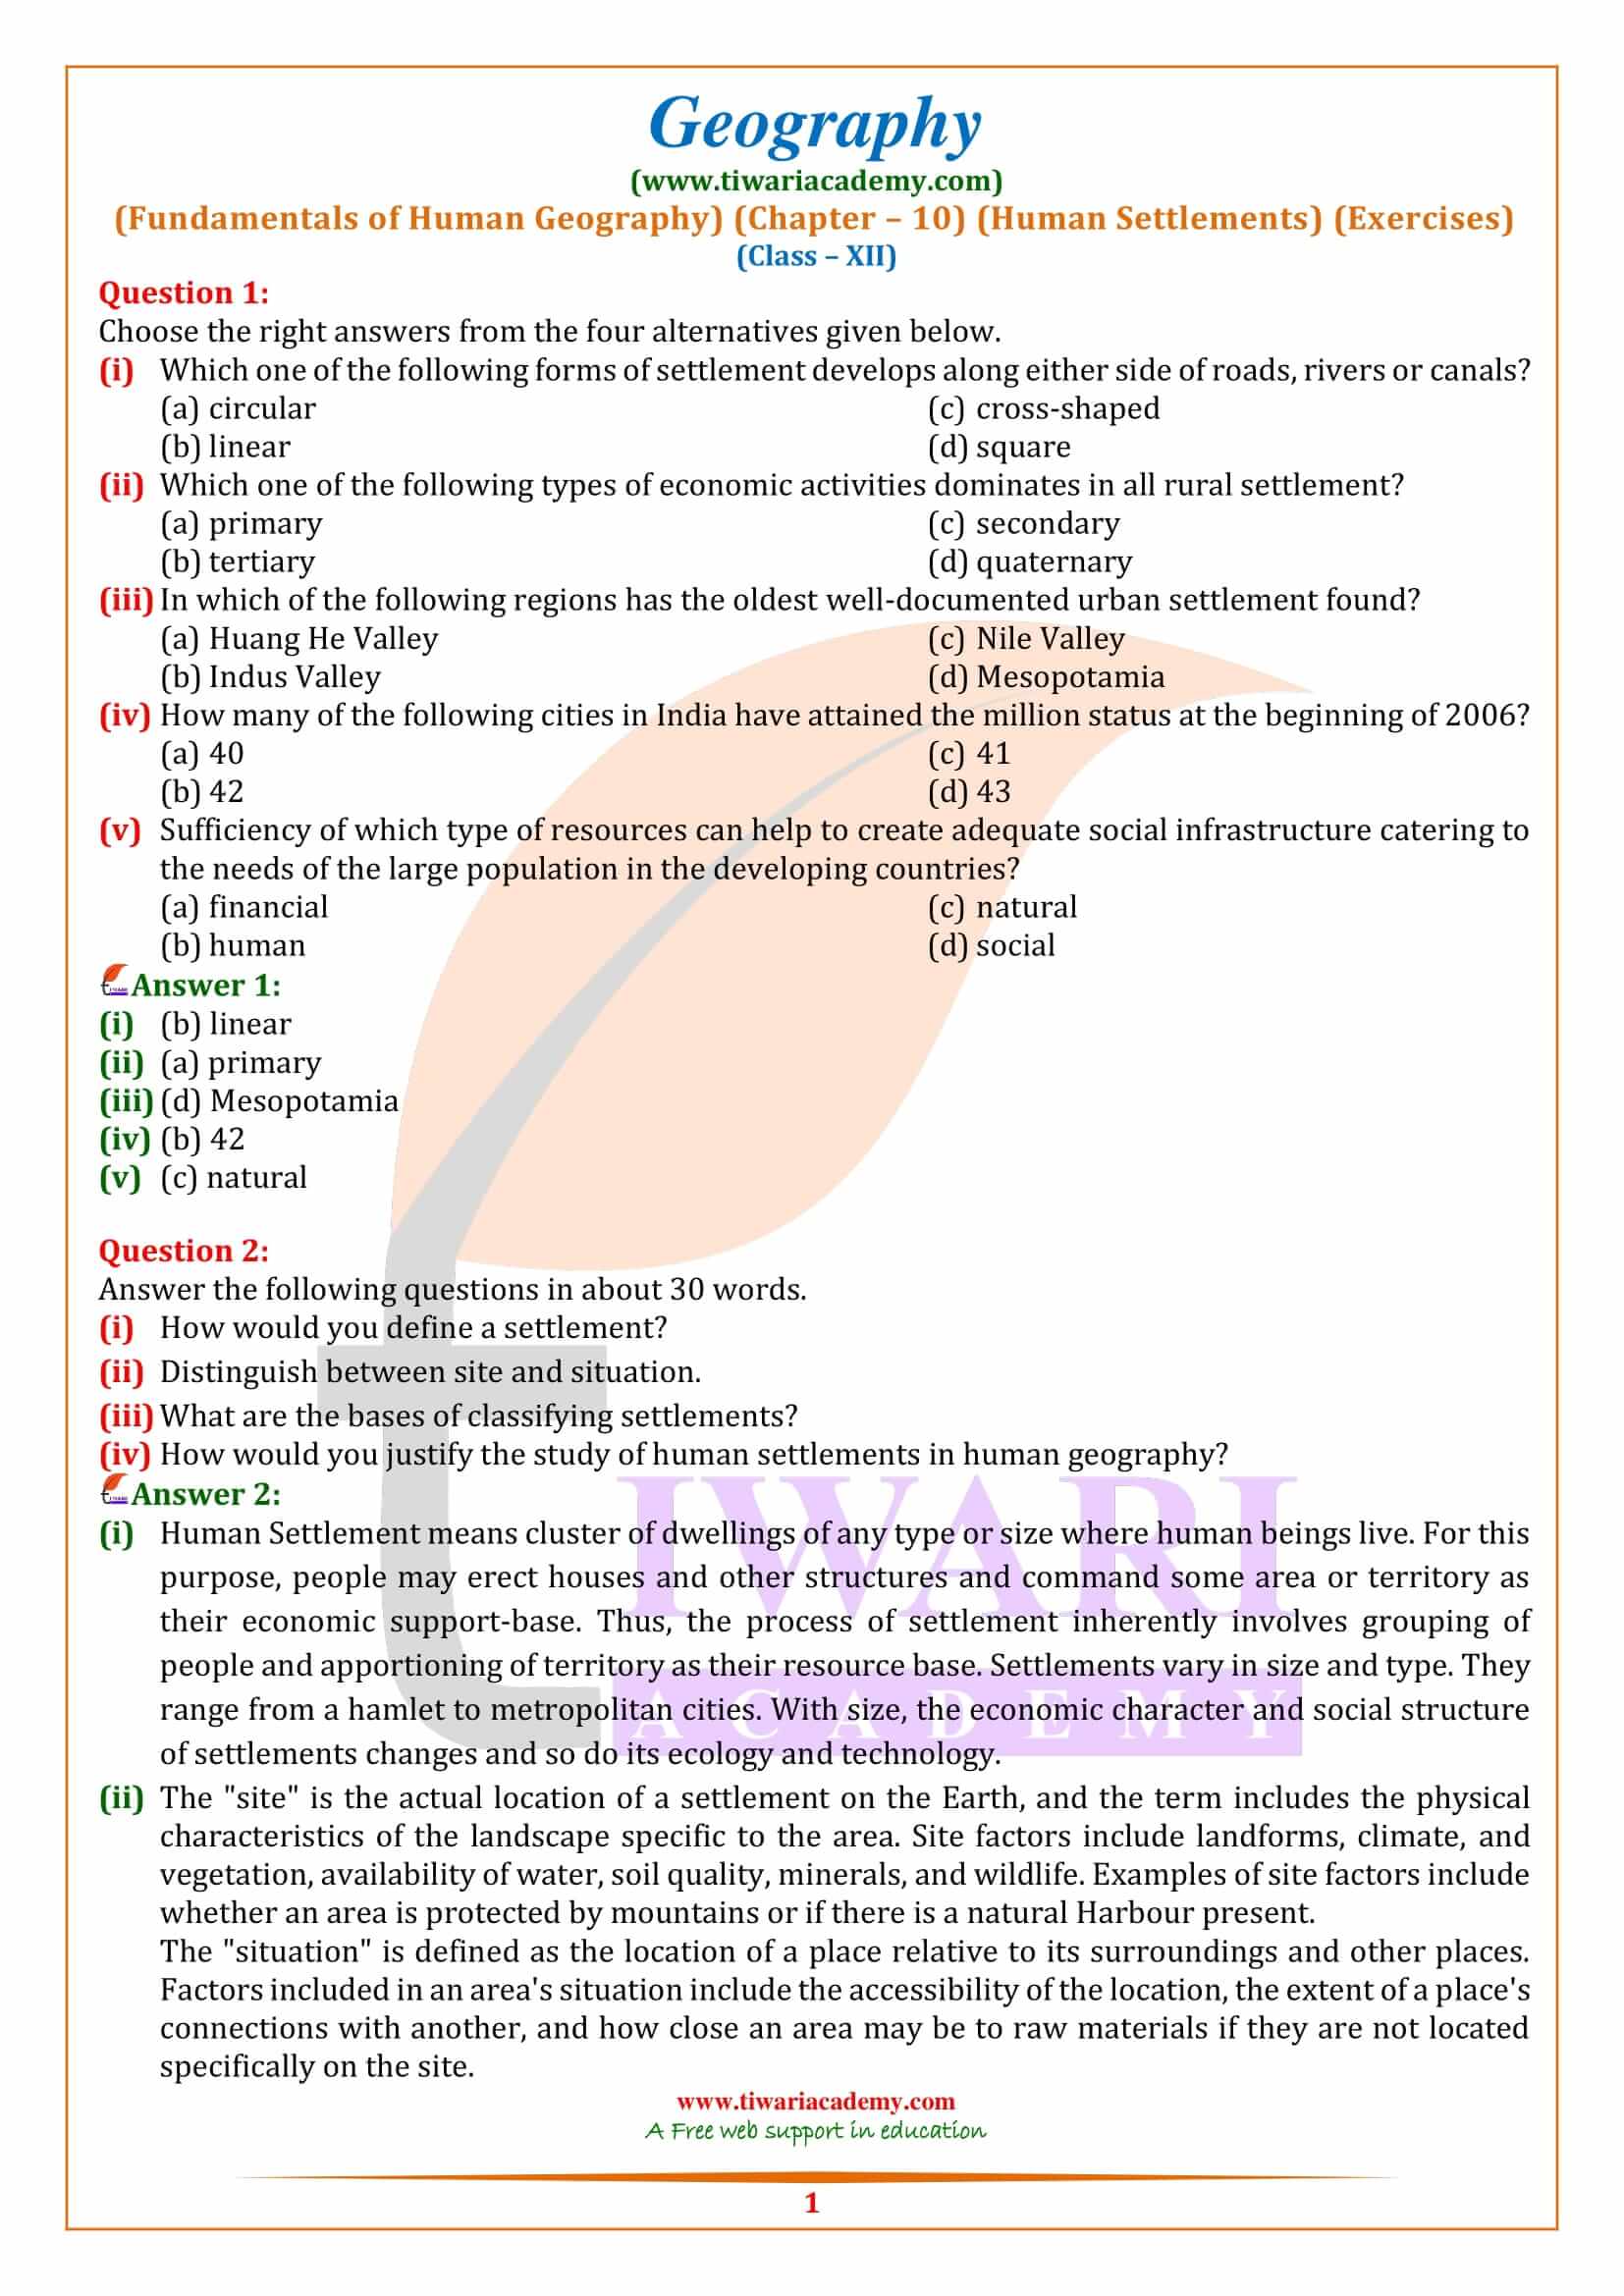 NCERT Solutions for Class 12 Geography Chapter 10